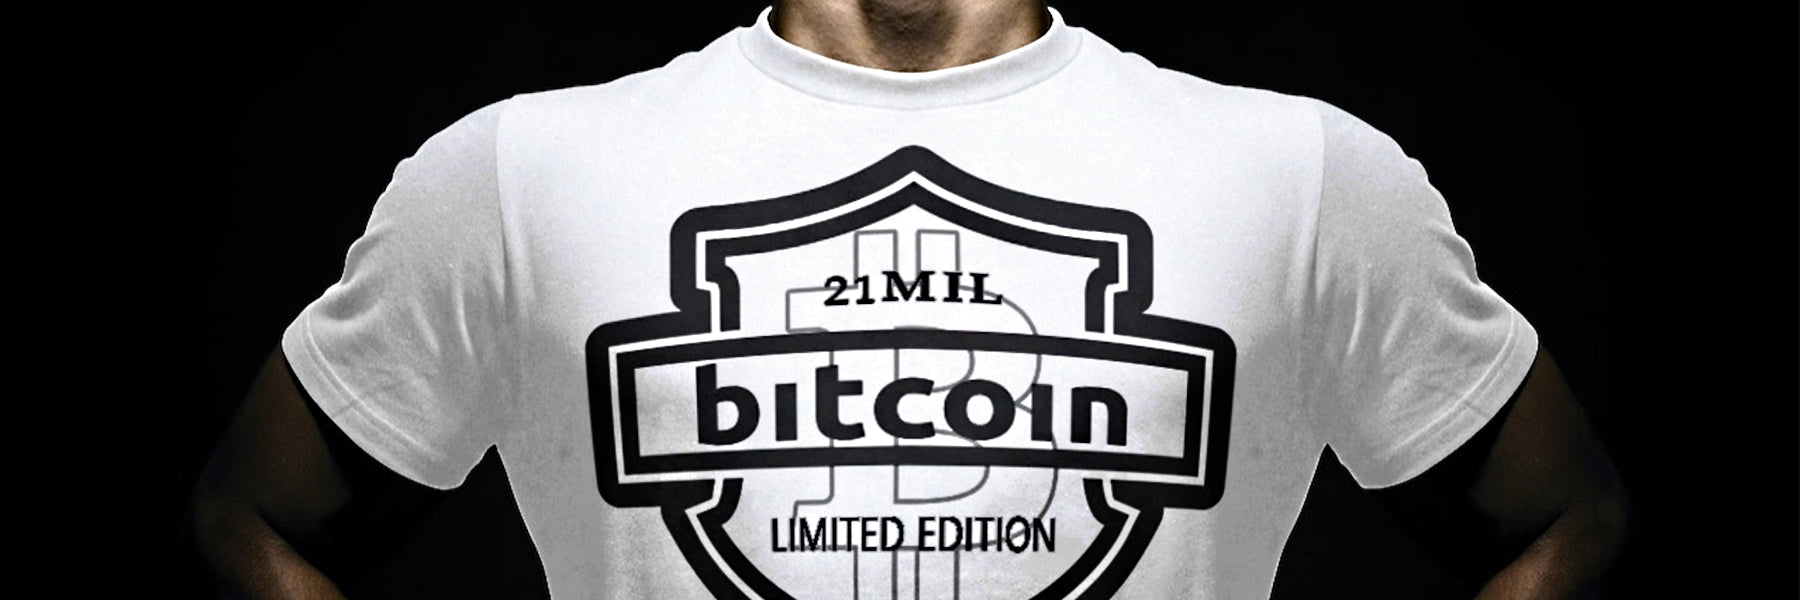 Shop Bitcoin, Ethereum, Xrp apparel, accessories, and more at In-N-Out Crypto. Elevate your style with unique t-shirts, mugs, hoodies, and embroidered hats for the ultimate crypto enthusiast and future investor